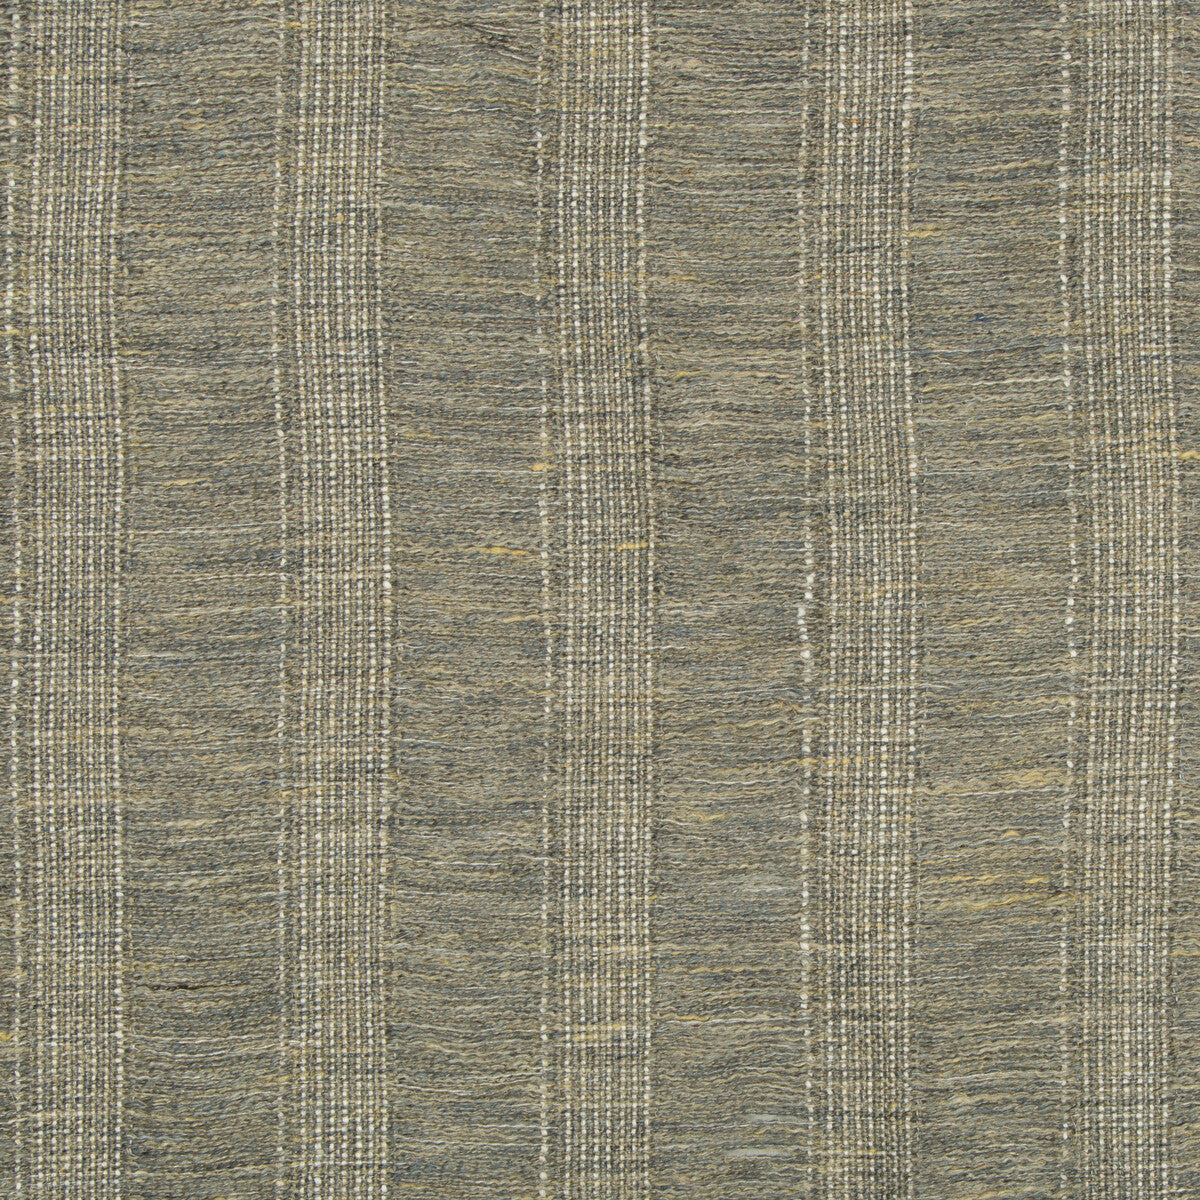 Fermata fabric in lark color - pattern 4227.11.0 - by Kravet Couture